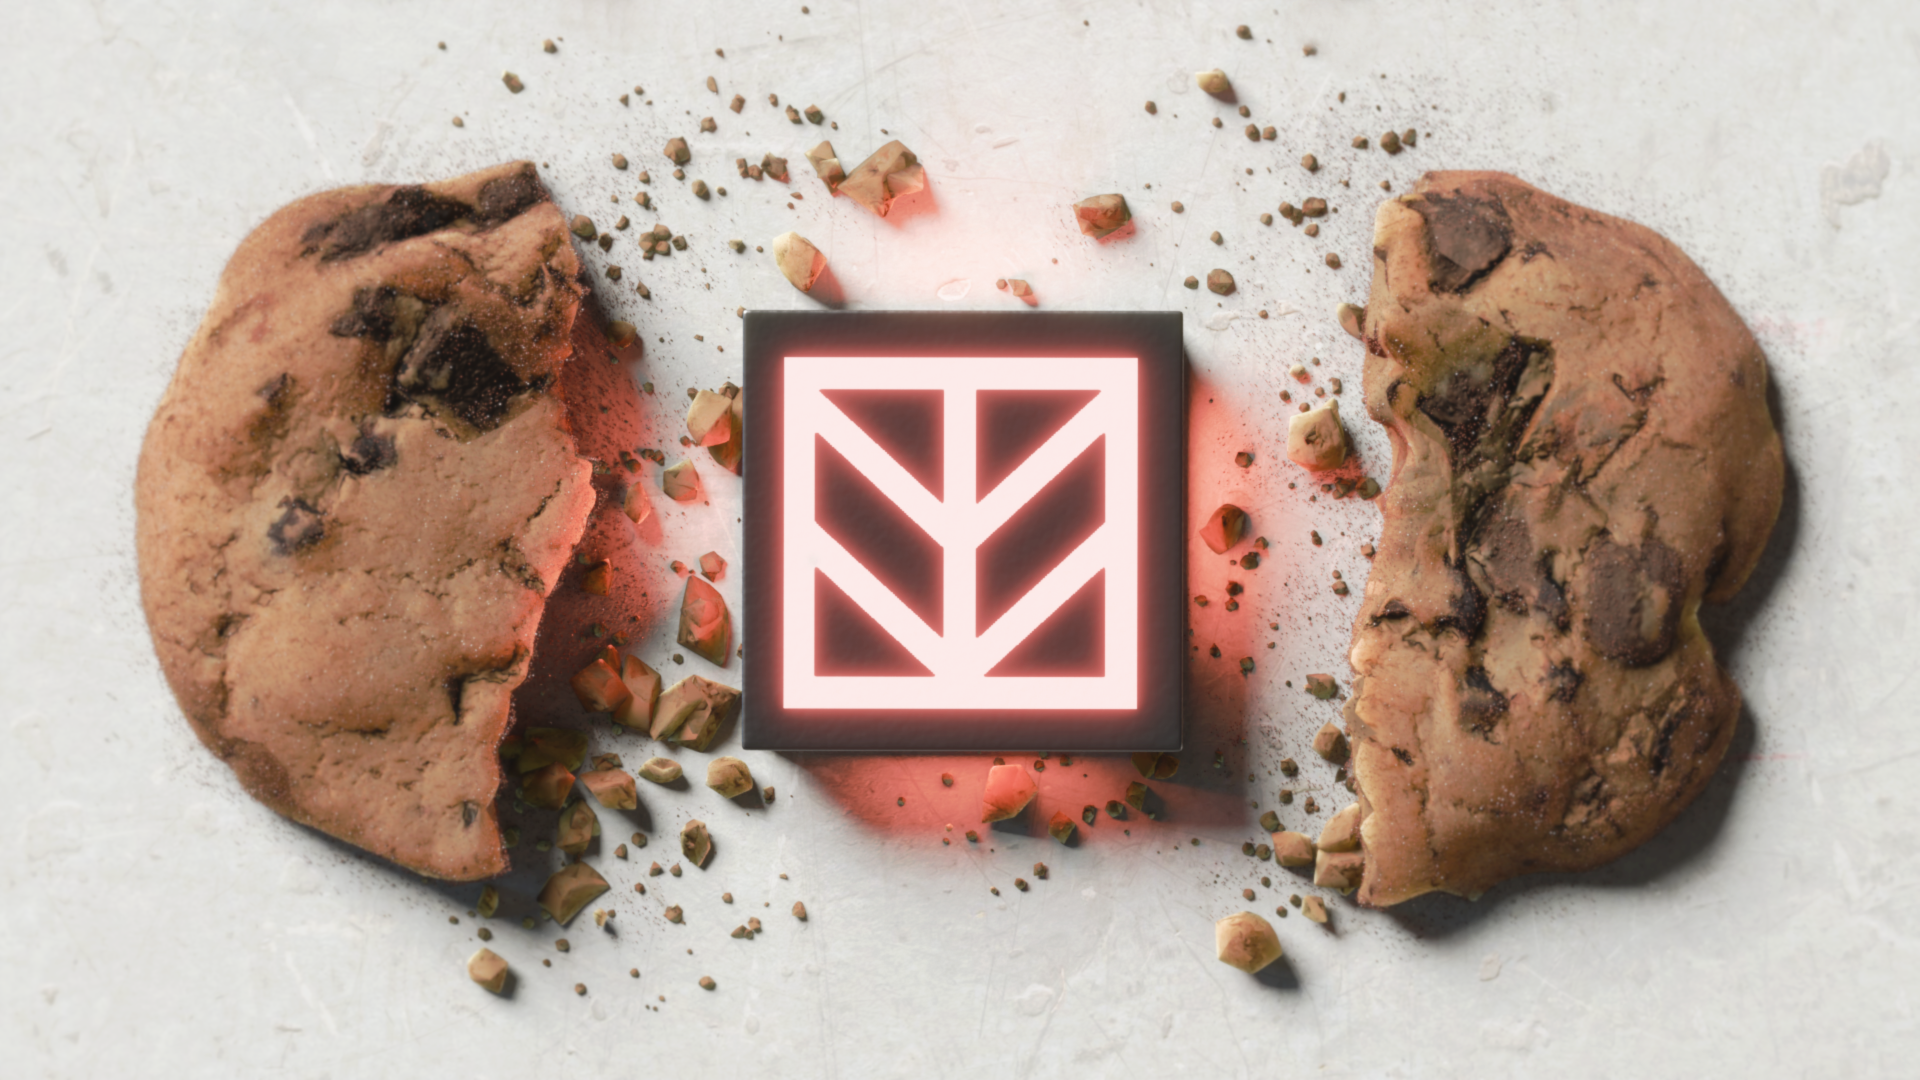 Cookies’ Endless Expiration is the New Horizon for Digital Marketing